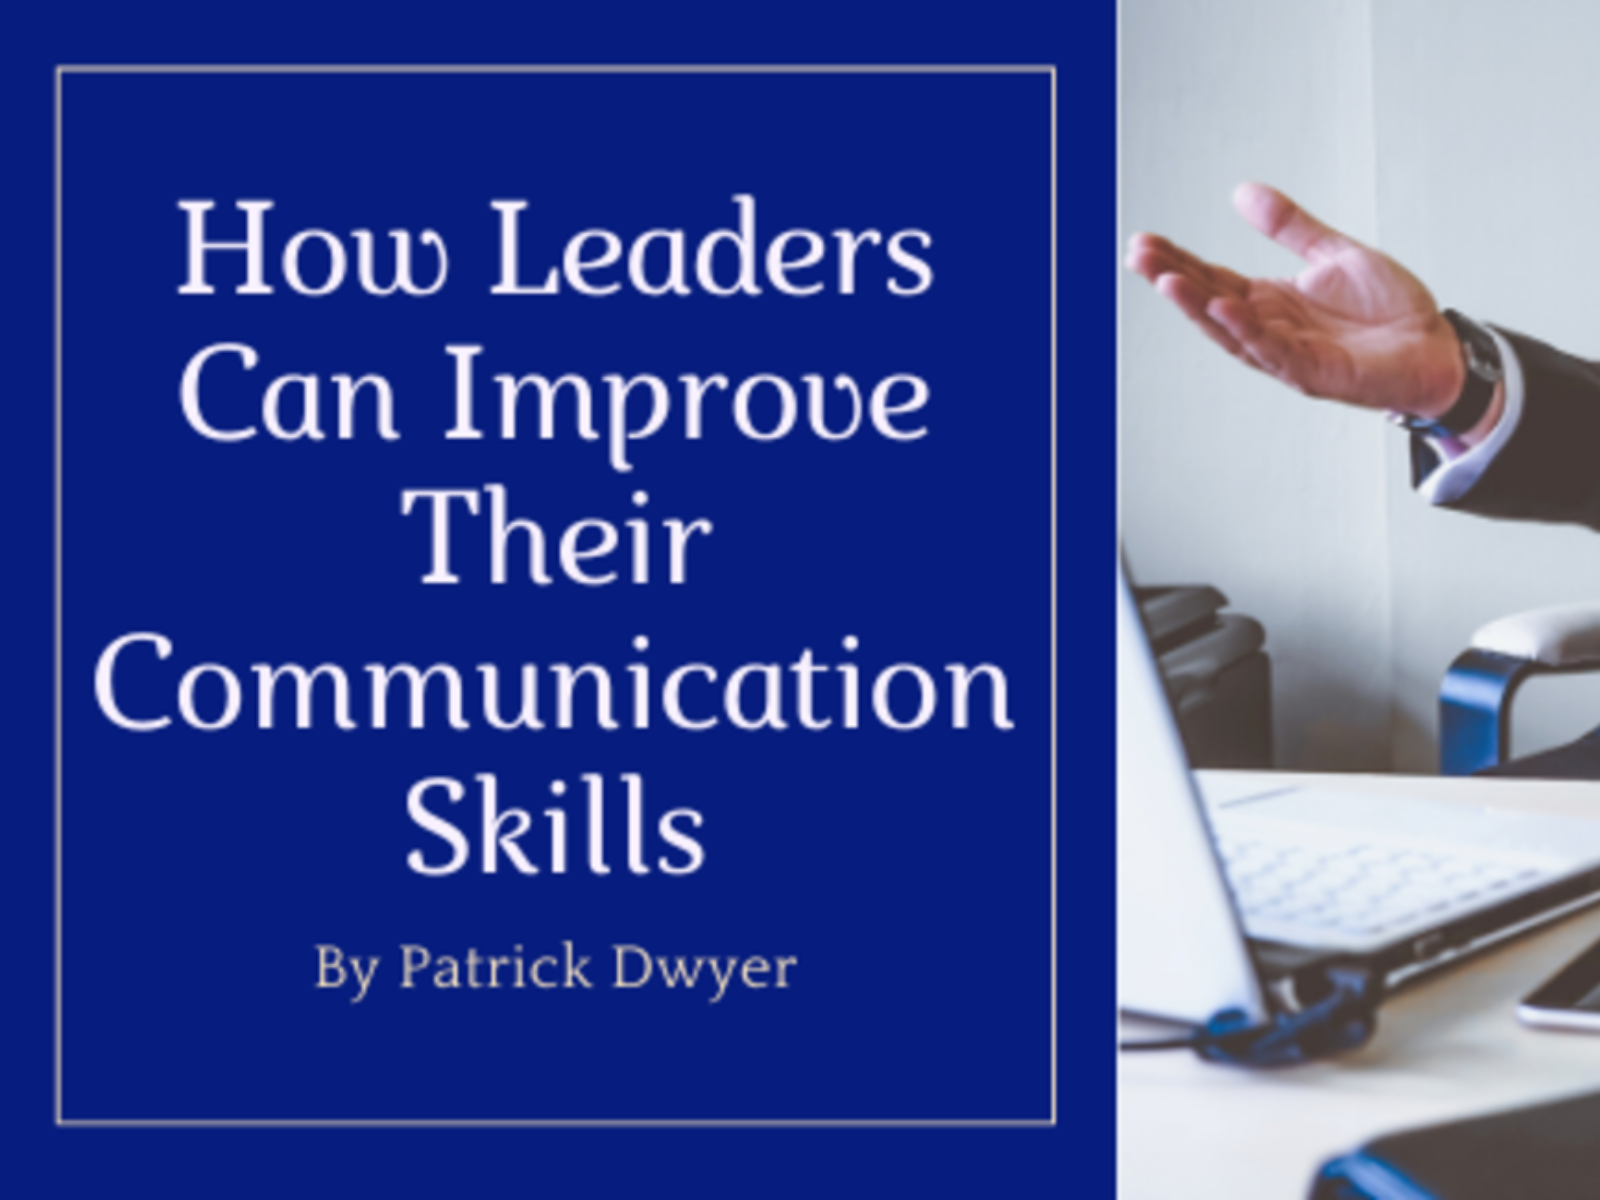 Cover of How Leaders Can Improve Their Communication Skills.